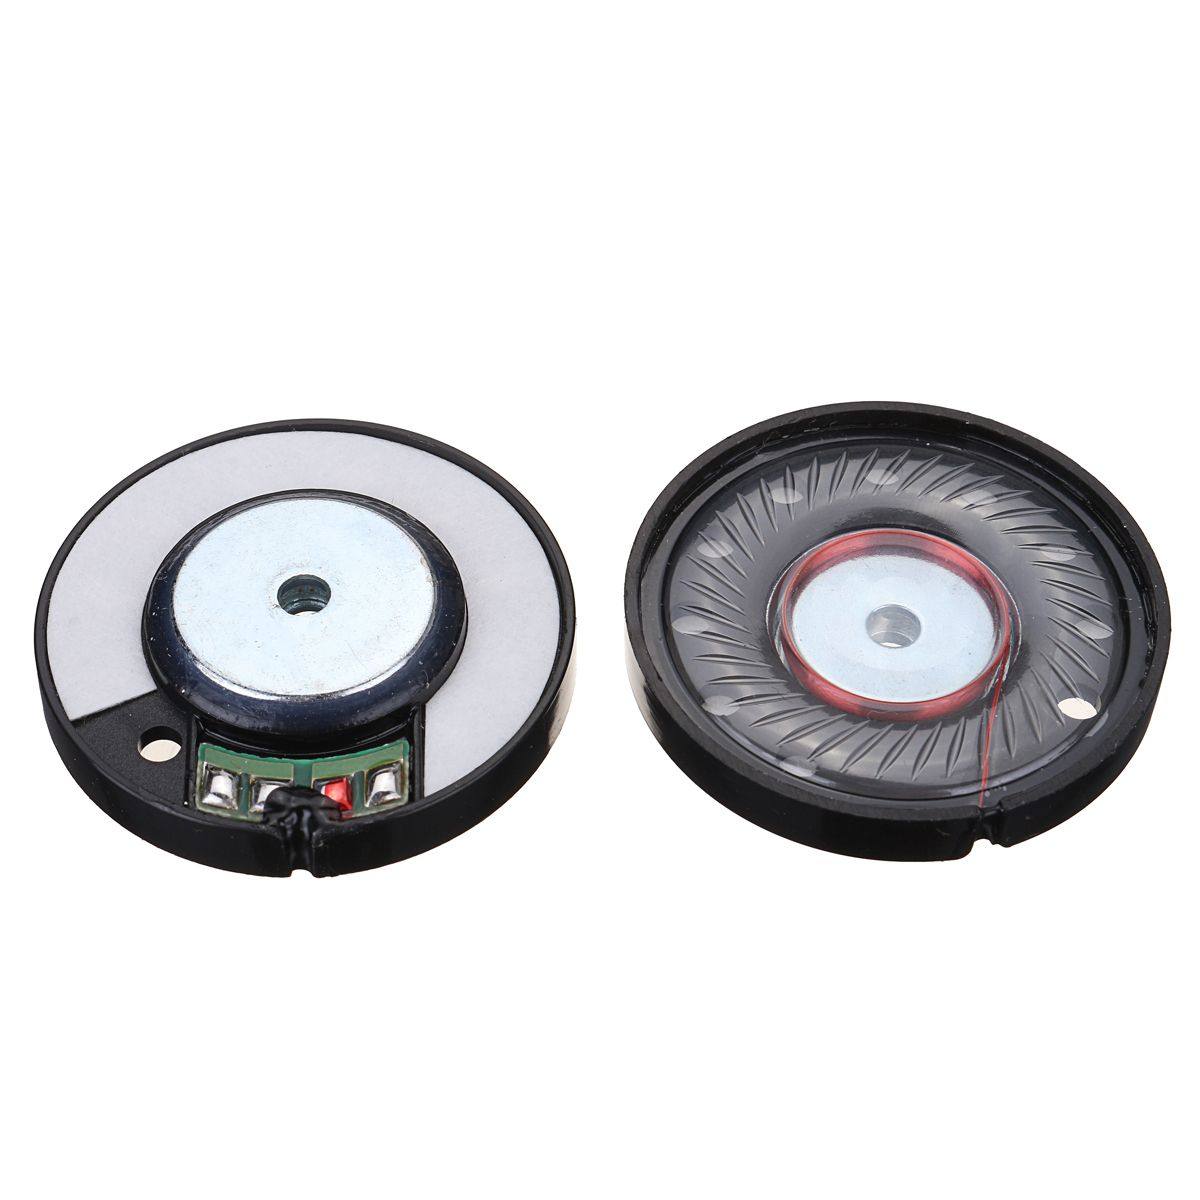 2pcs-30MW-5x38mm-Replacement-Speaker-Driver-For-Headphone-Earphone-1501062